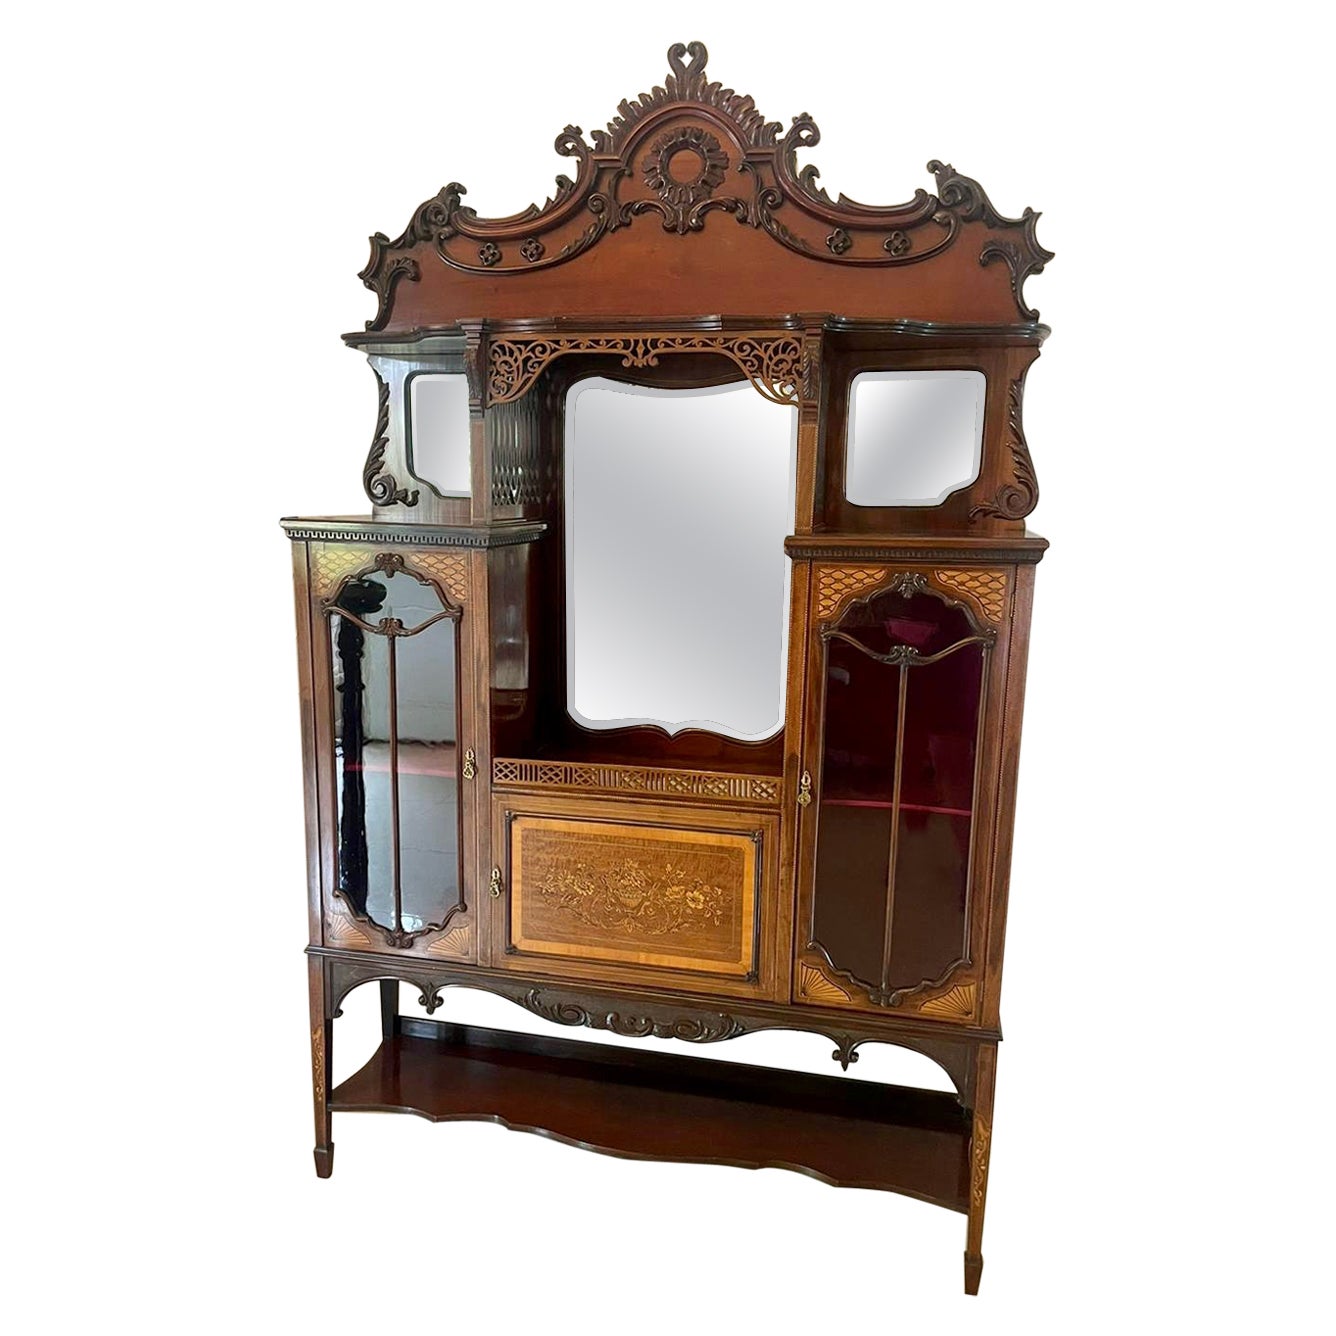 Outstanding Quality Large Antique Mahogany Inlaid Satinwood Display Cabinet For Sale